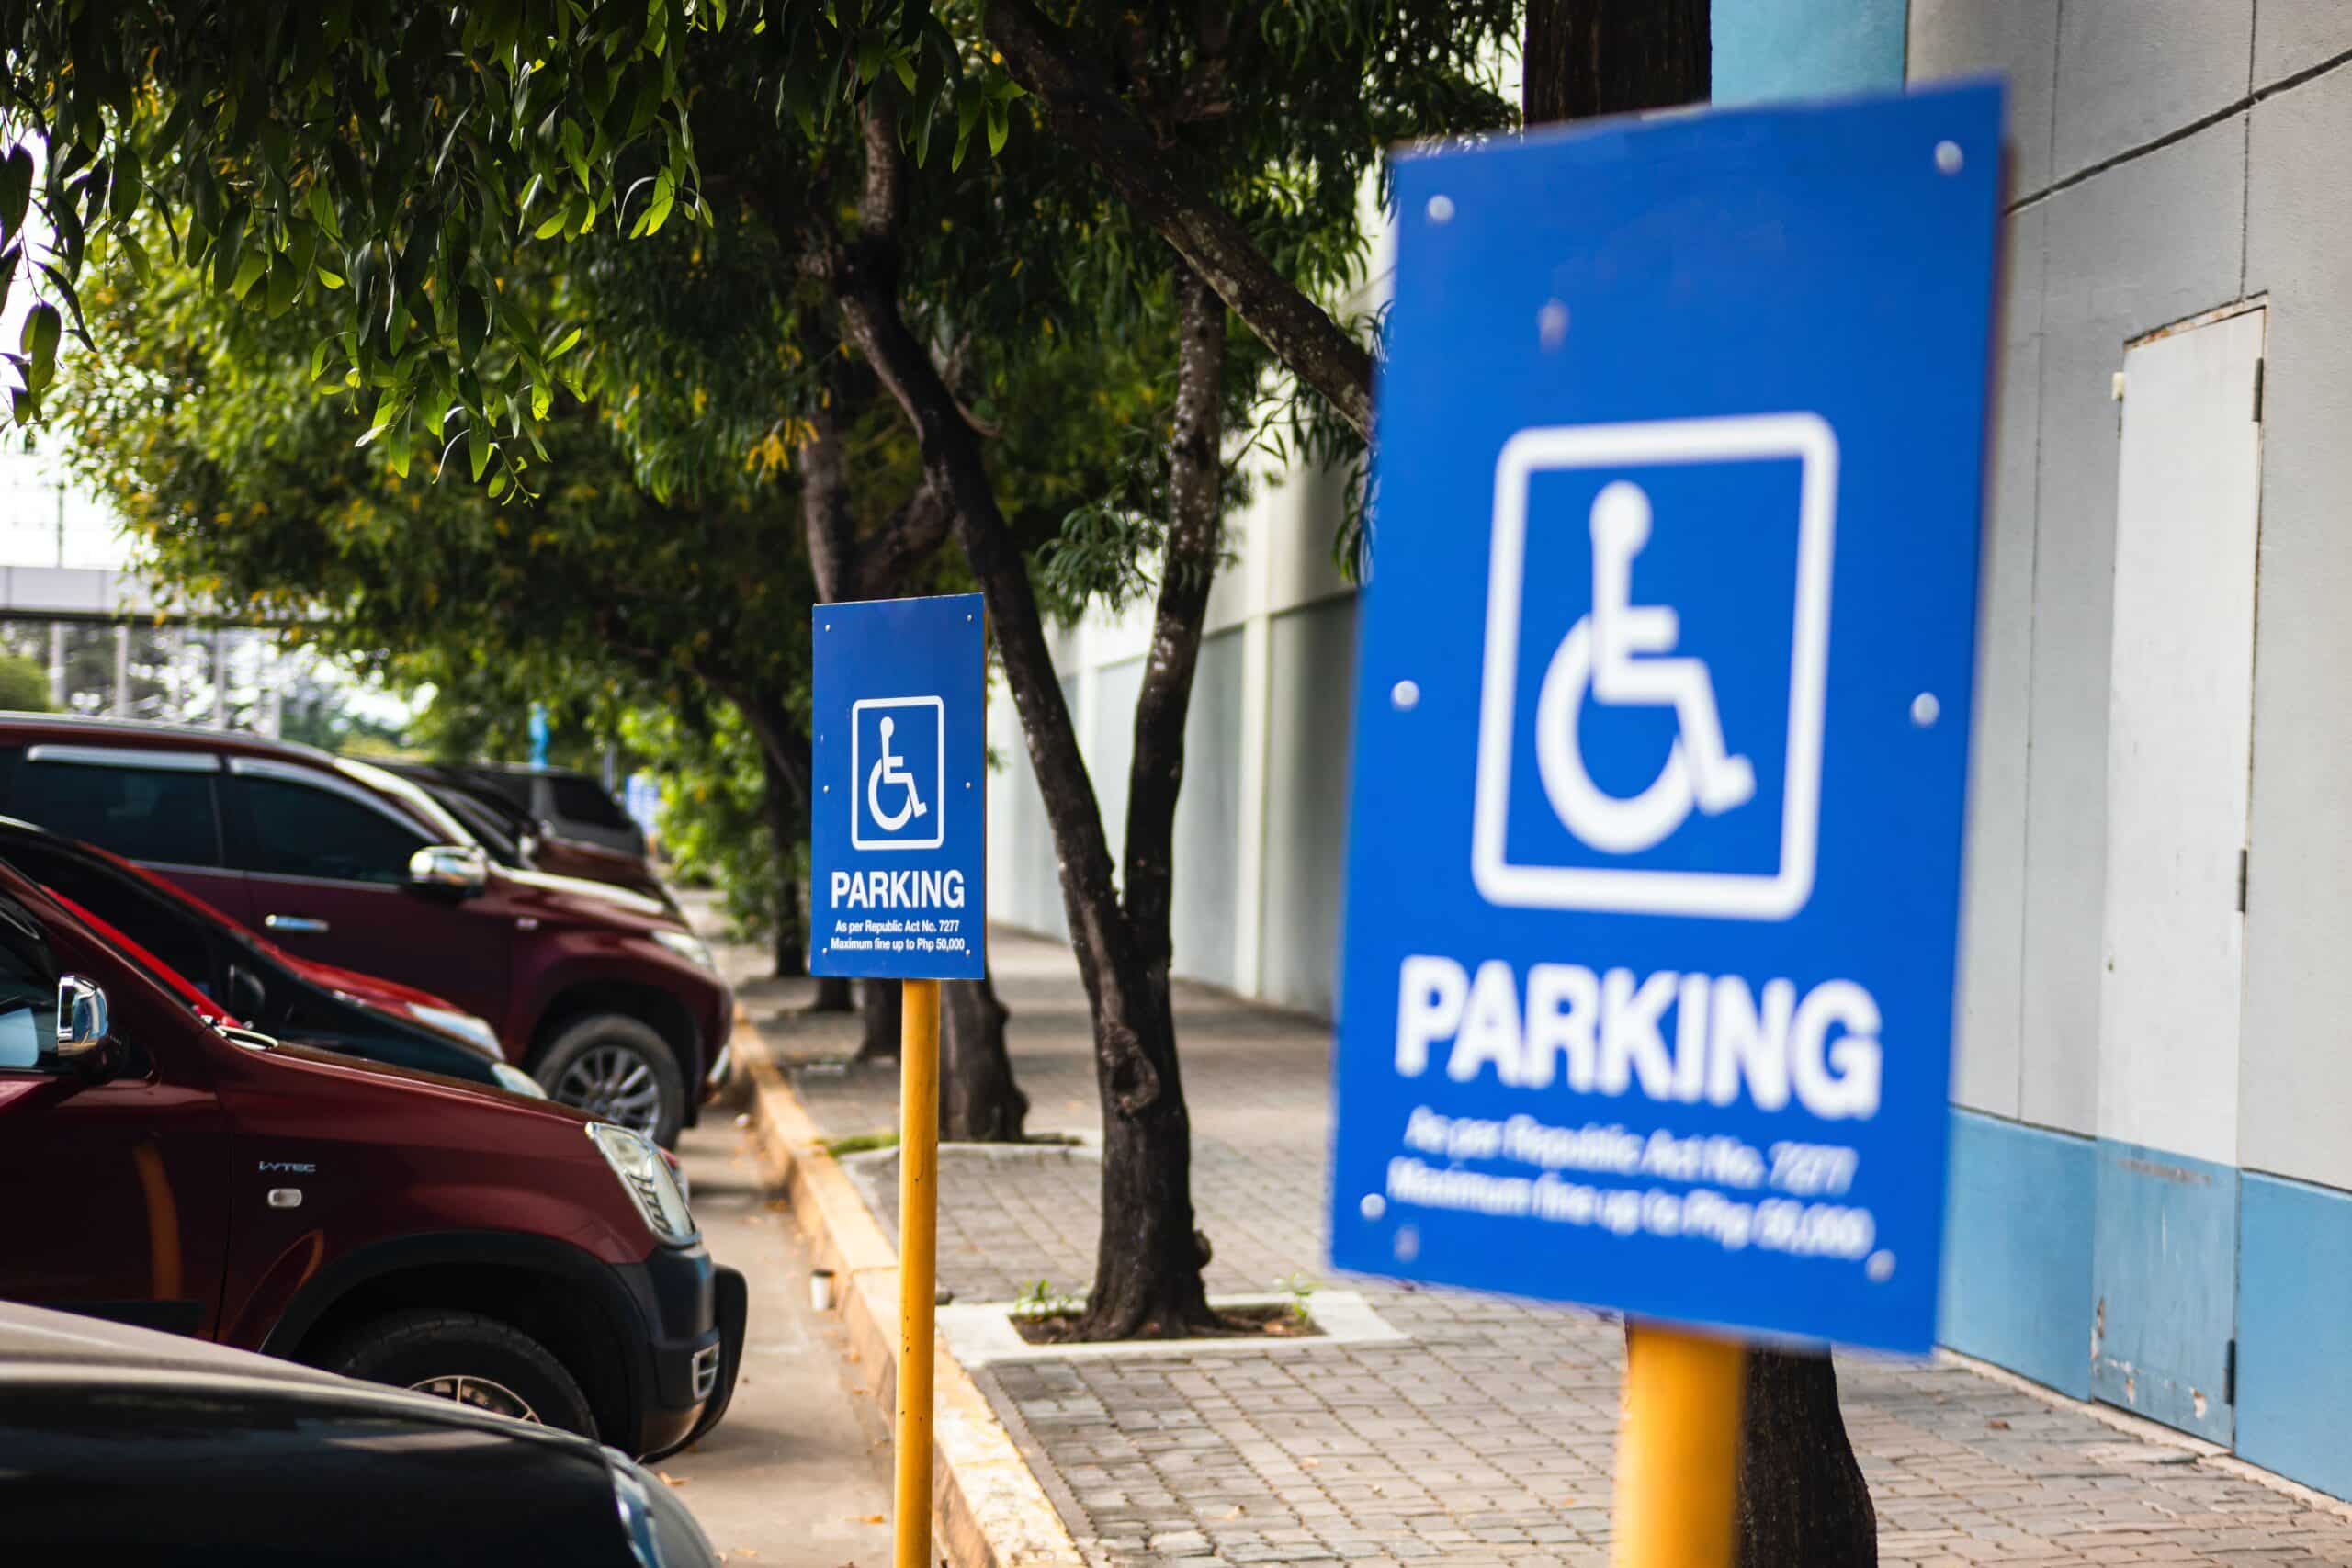 A blue sign indicating that it's a parking space only for disability parking permit holders.